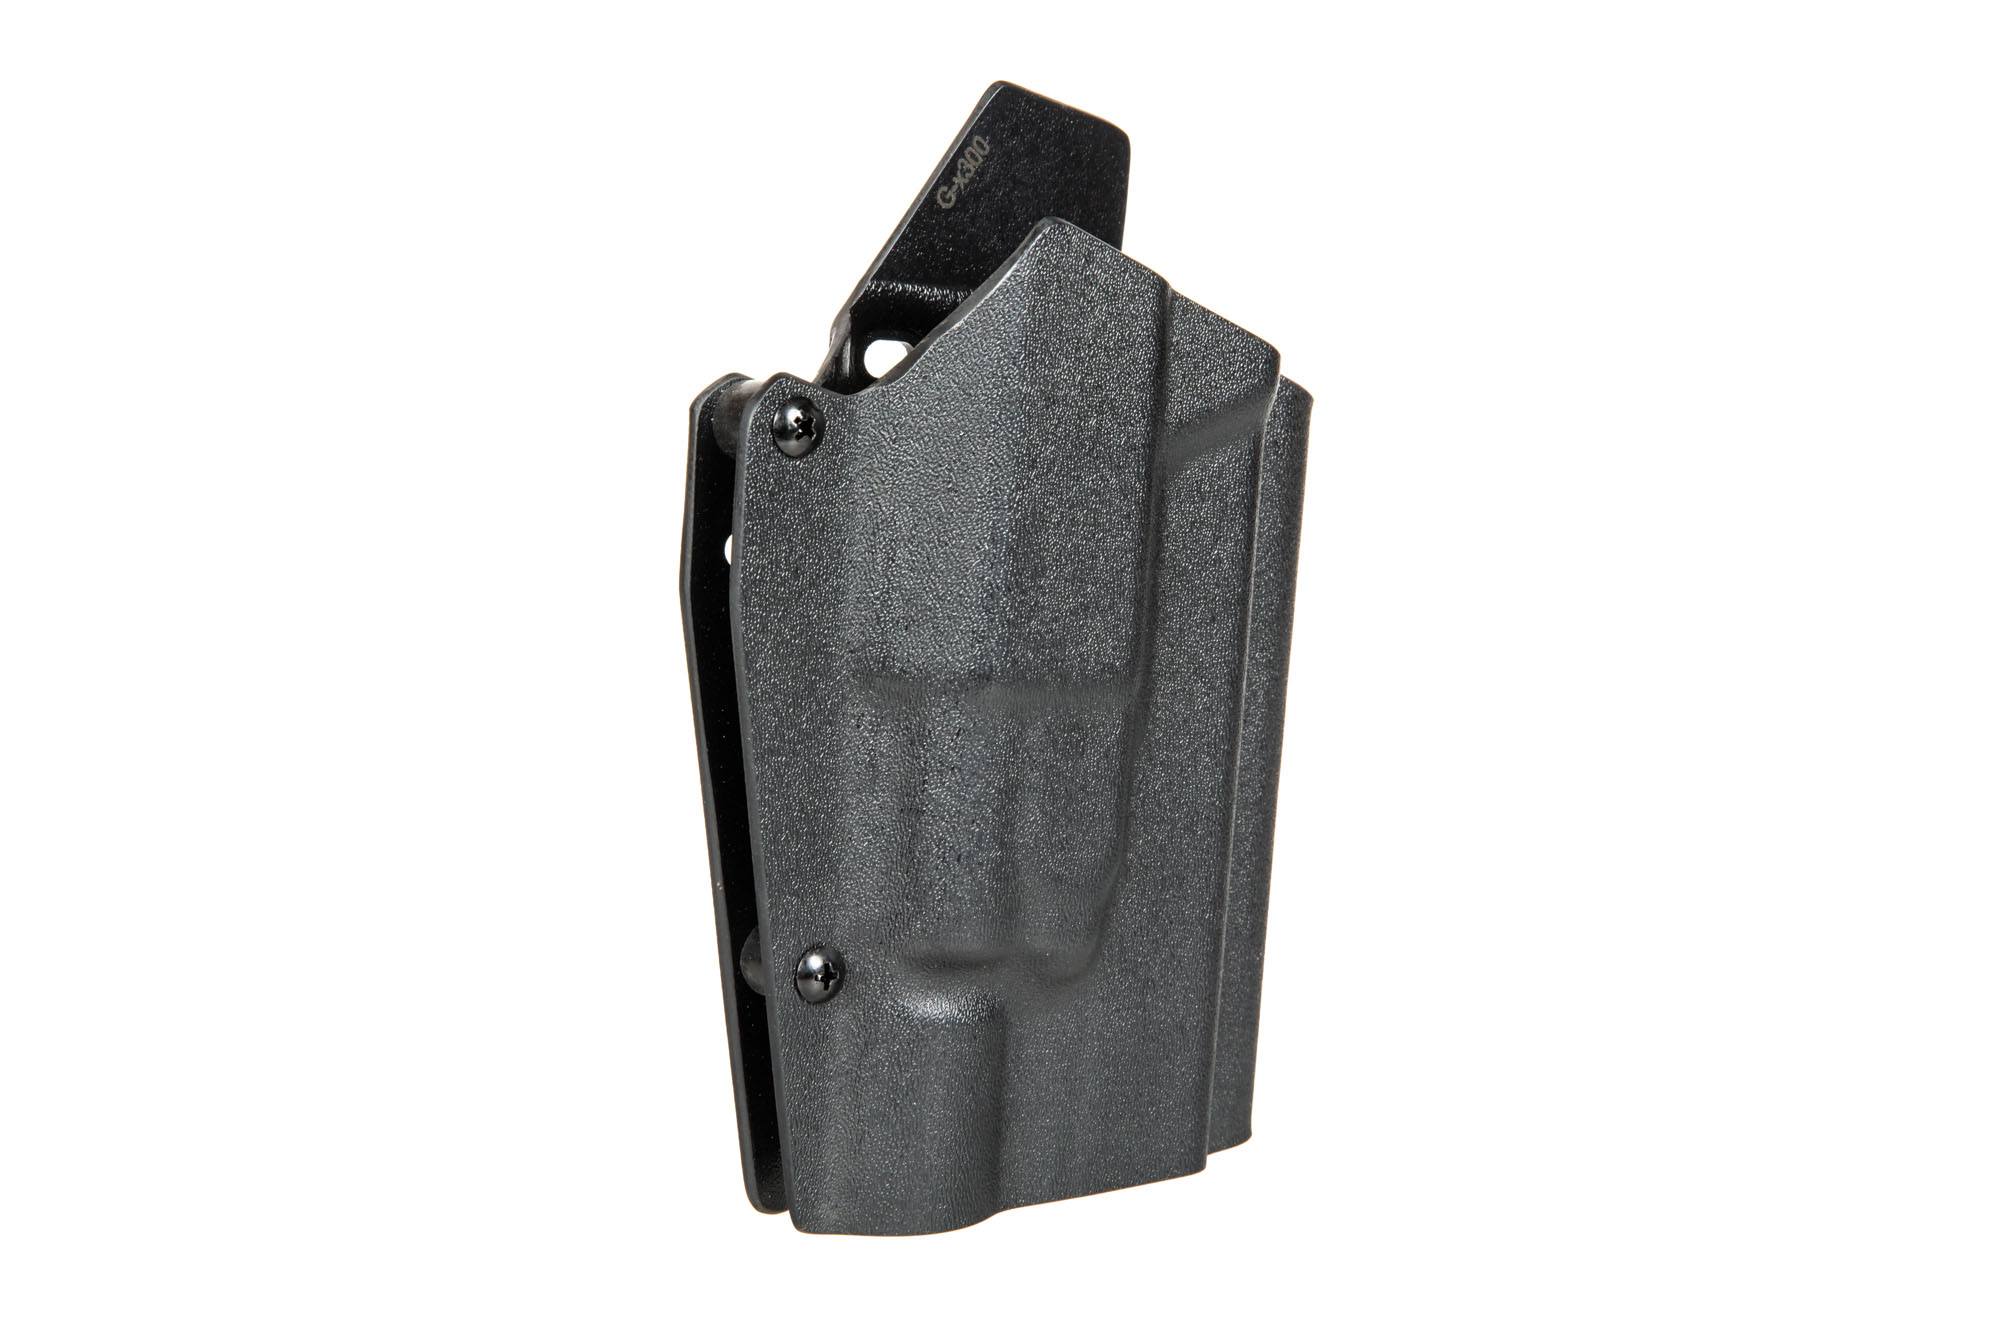 Kydex Holster for G17 replicas with X300 Flashlight - Black